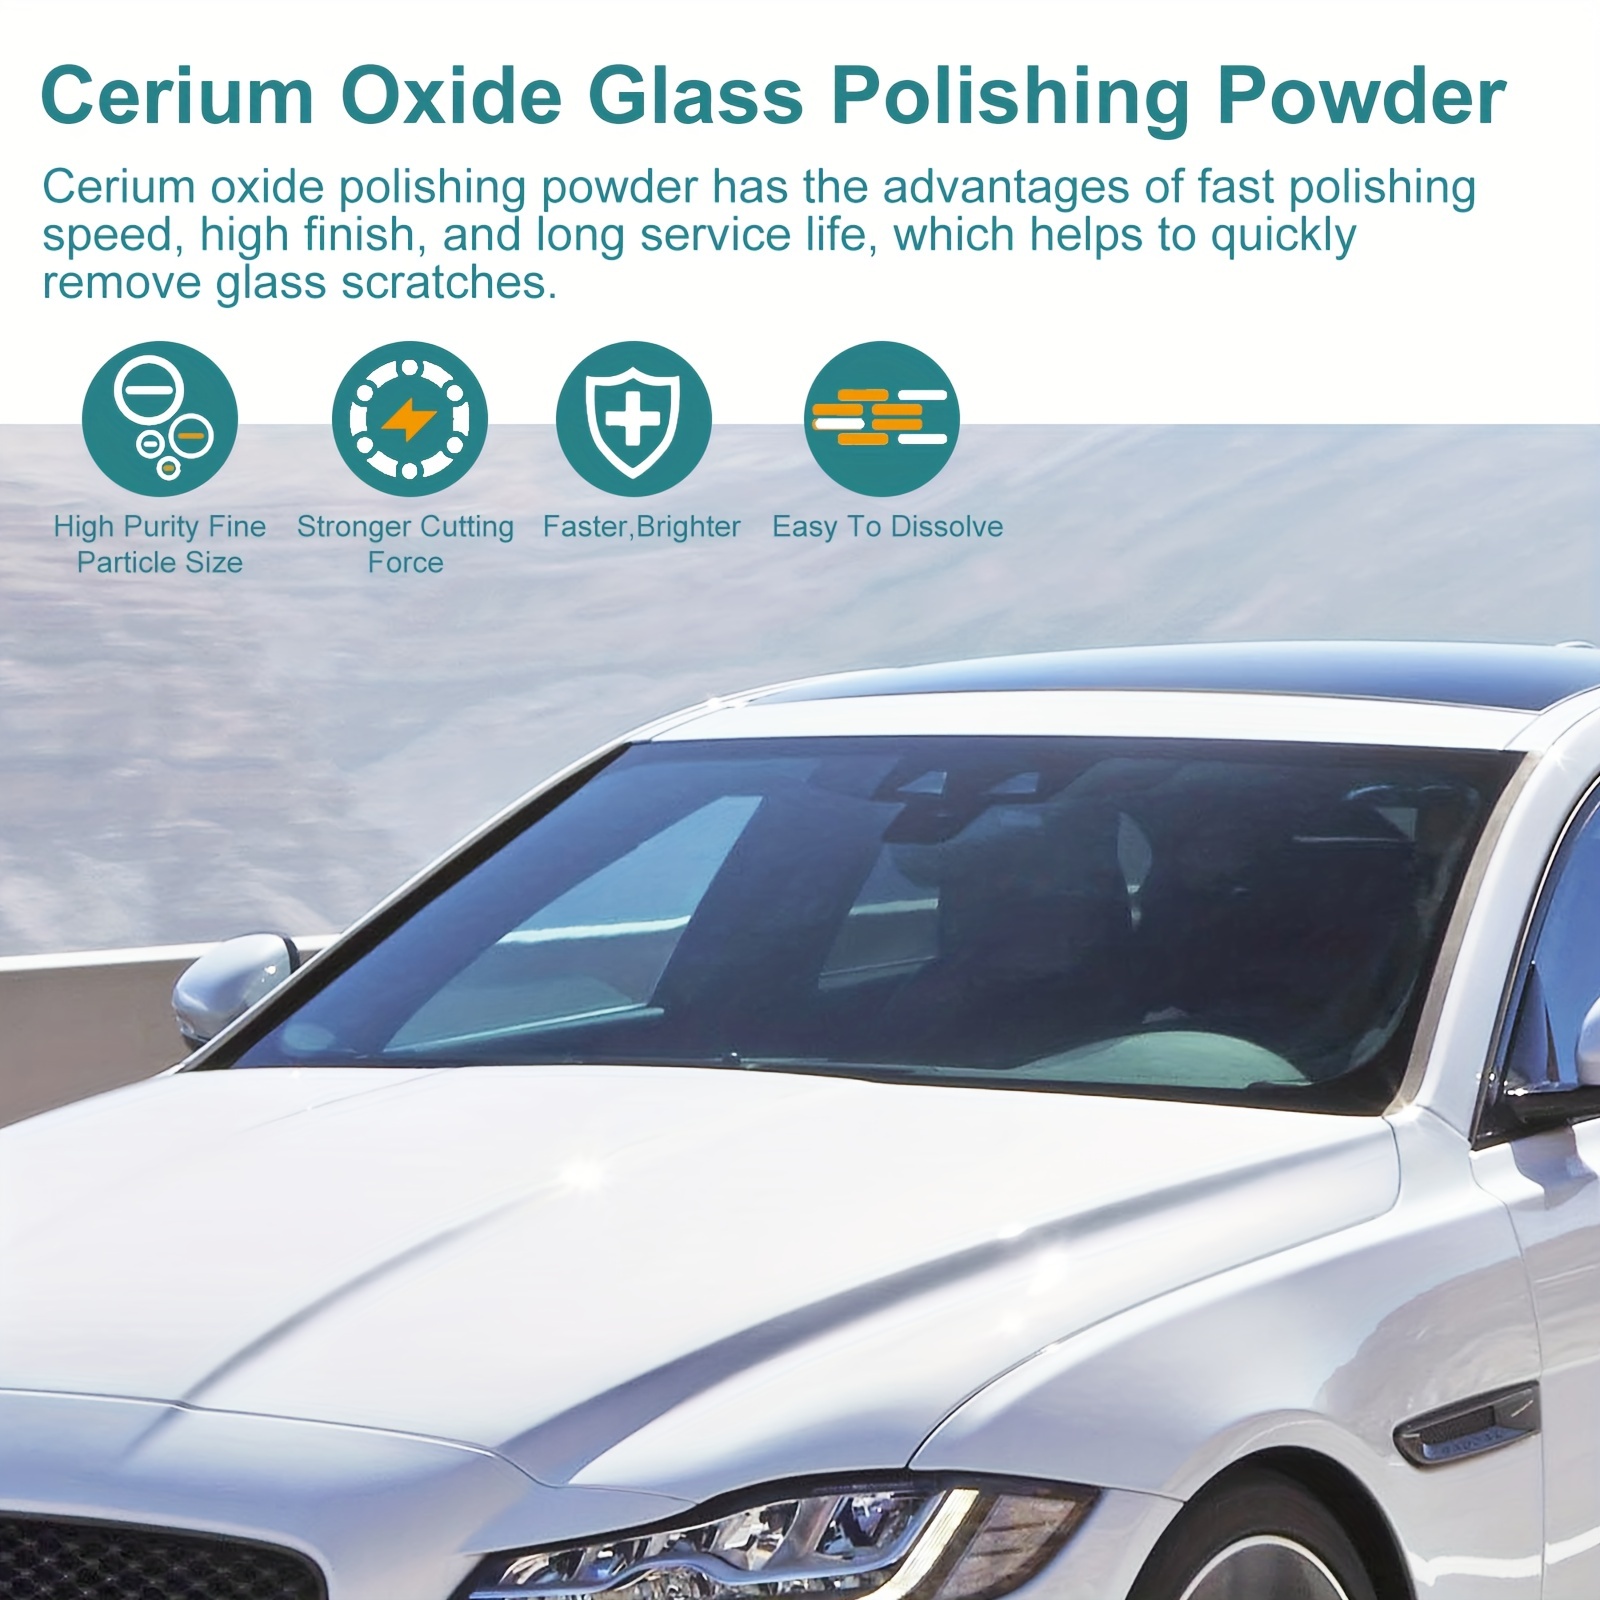 How to Remove Scratches from Windshield Using Cerium Oxide 